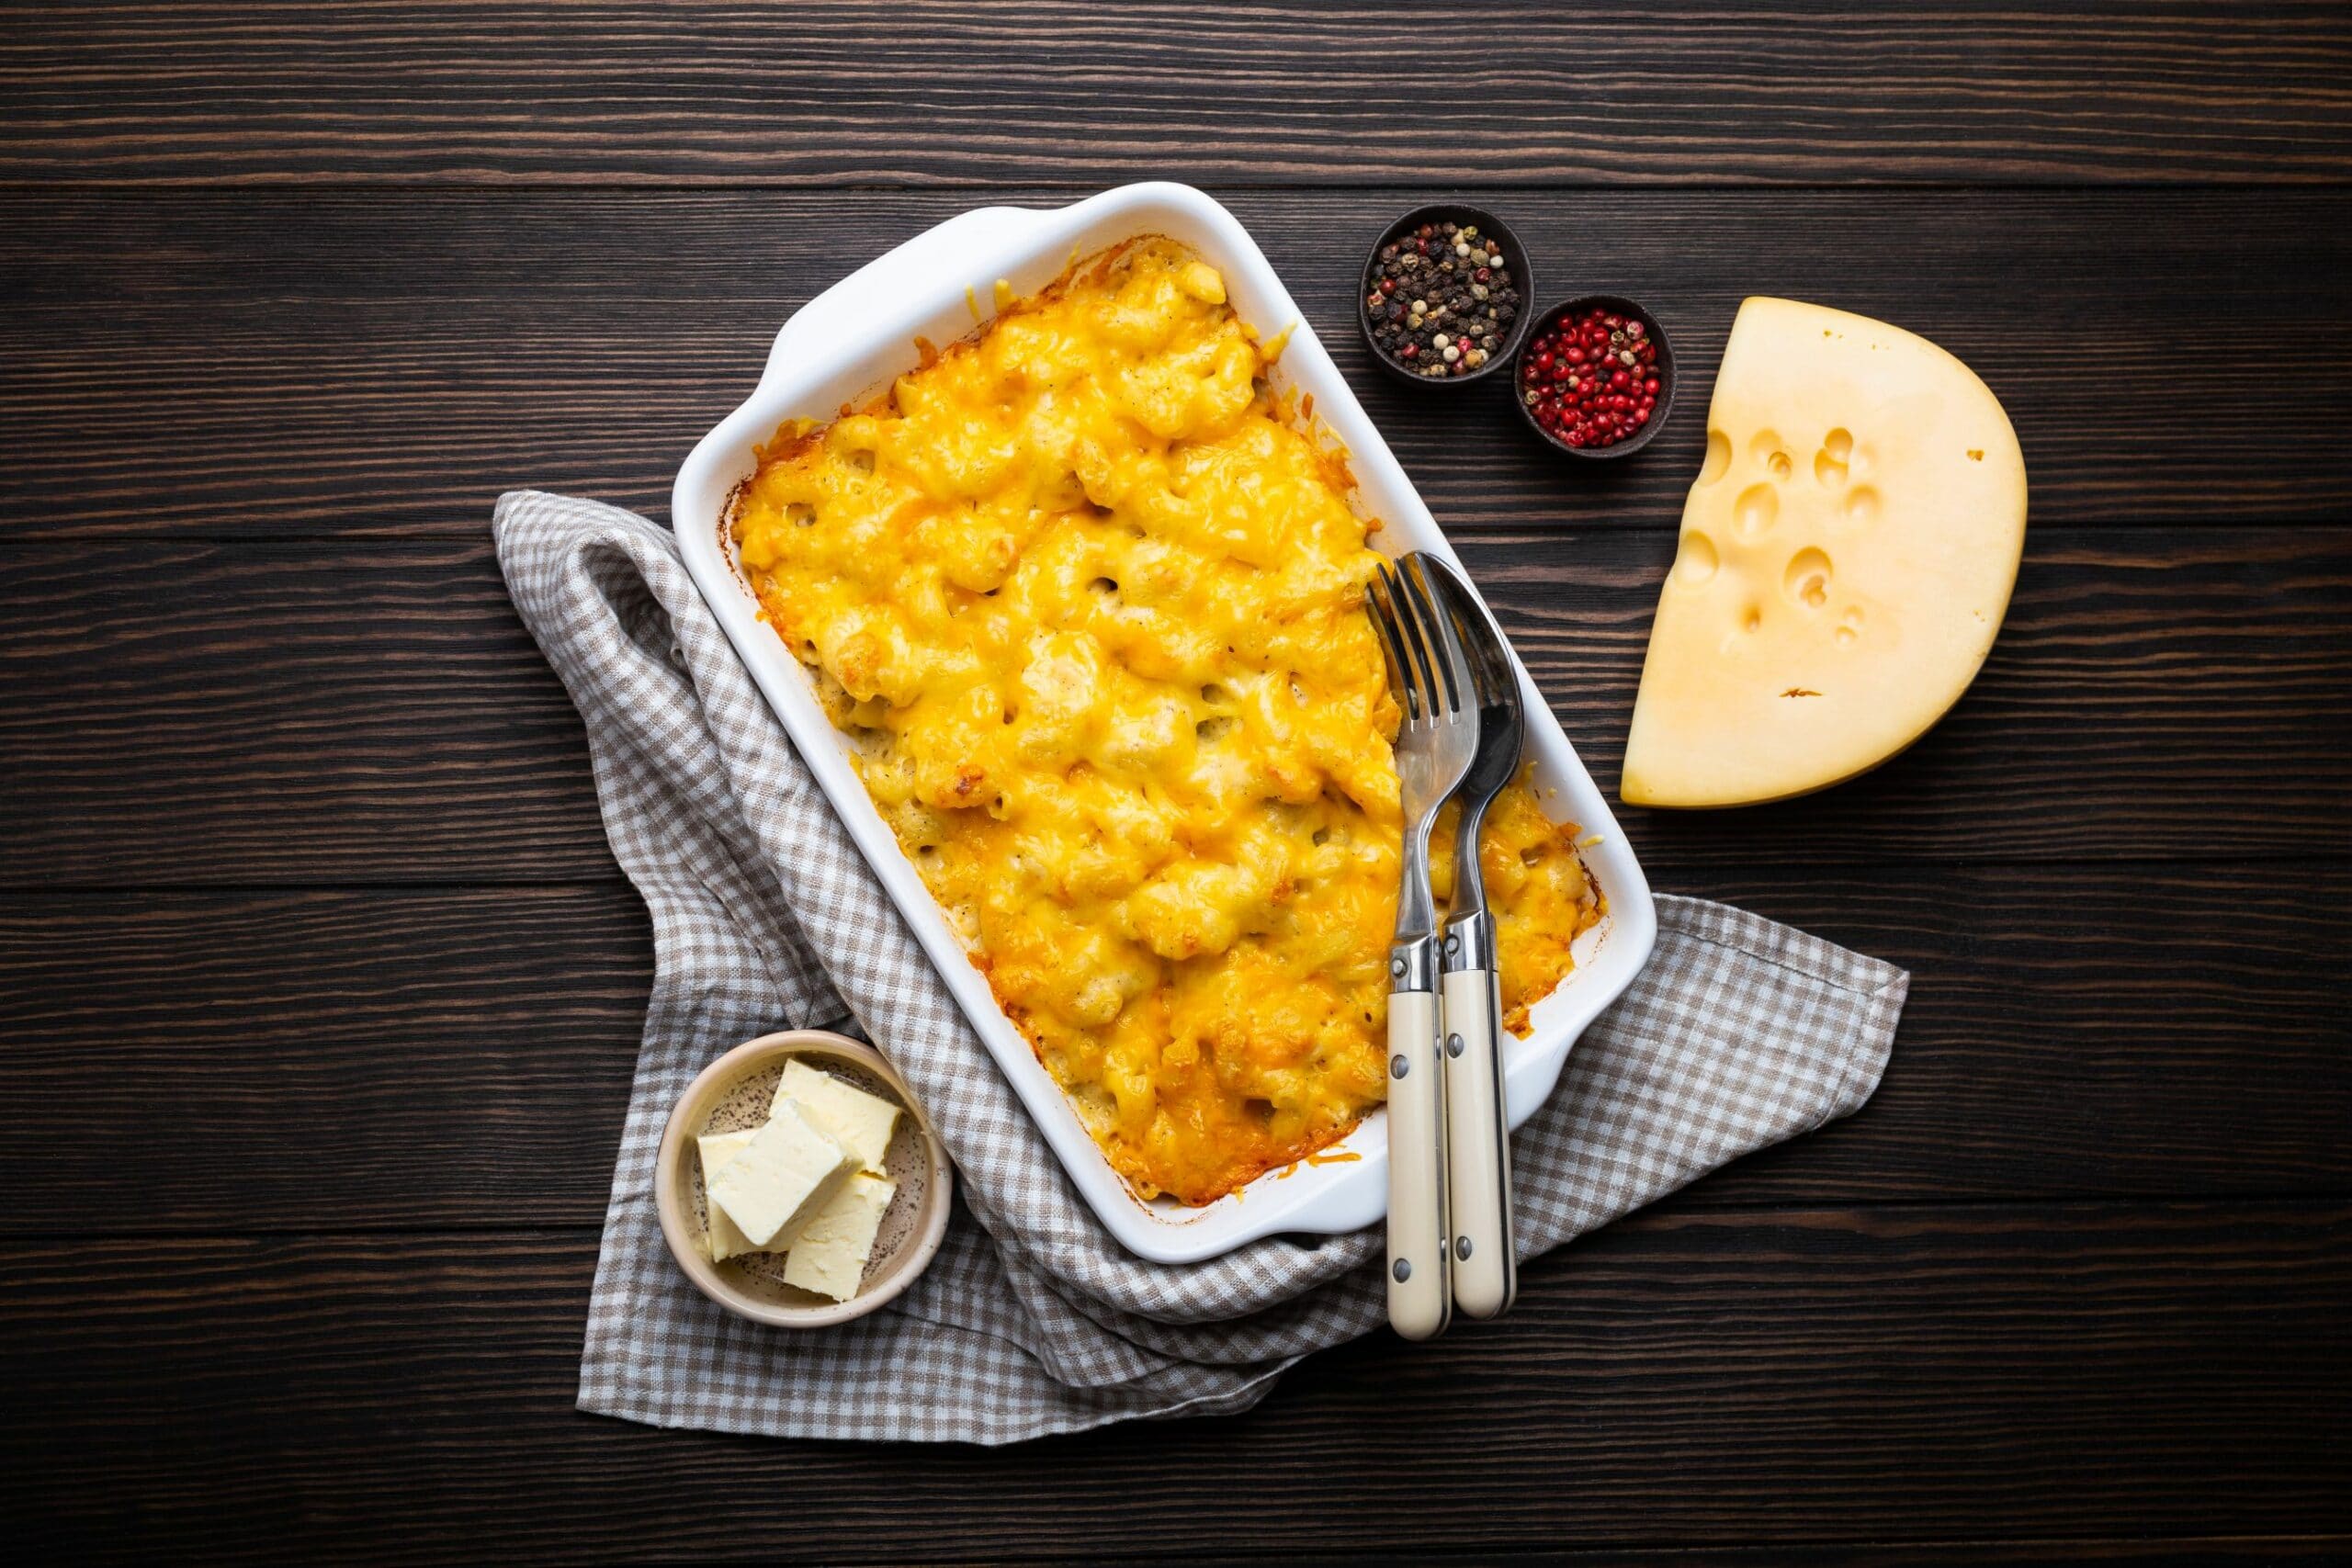 https://42degrees.com/wp-content/uploads/2021/09/macaroni-and-cheese-CR4NPHC-1-scaled.jpg